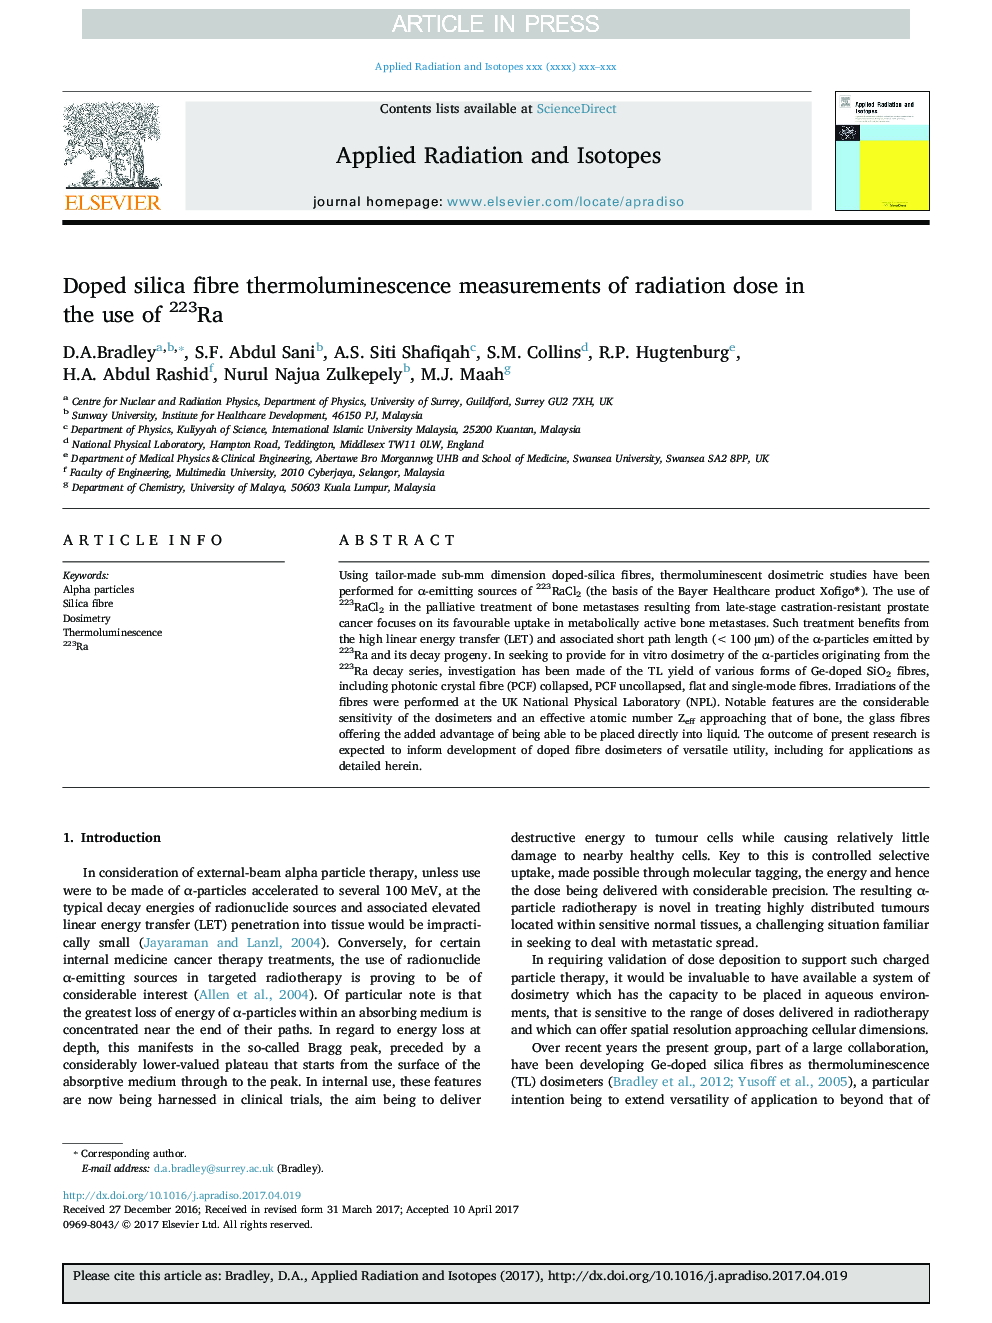 Doped silica fibre thermoluminescence measurements of radiation dose in the use of 223Ra